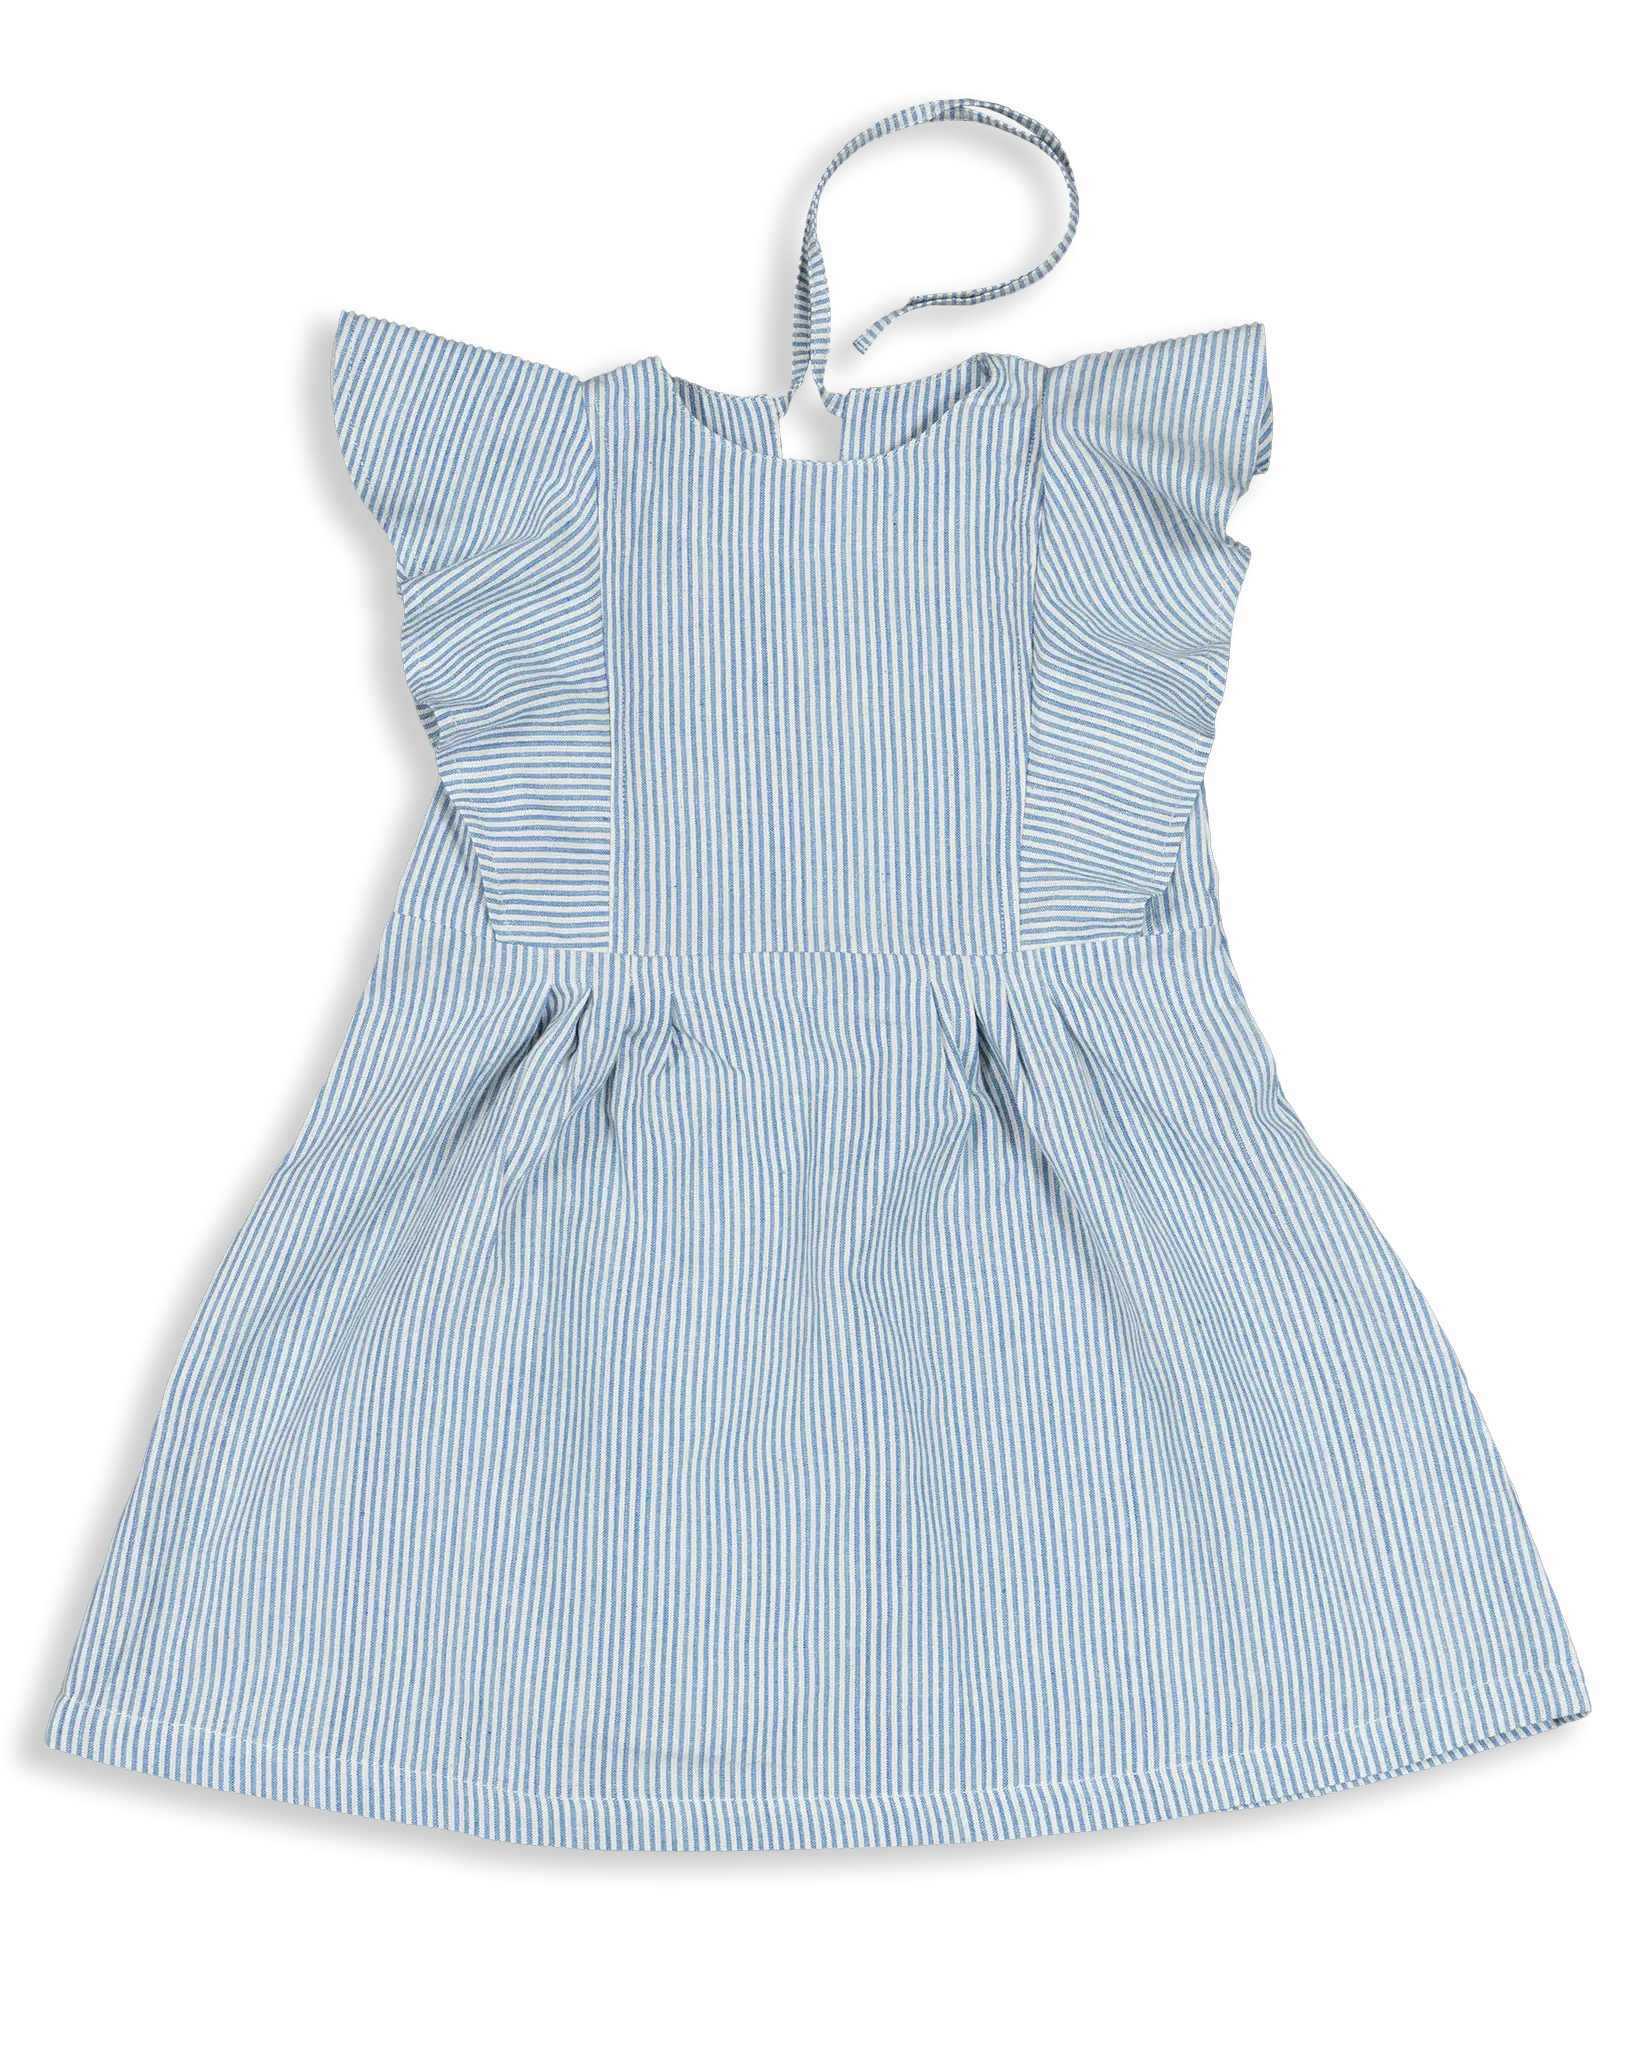 The neckline of this dress is pleated and a back slit with string to tie or zipper. We made the string in the back not only for convenience but to bring bonding between her and her parents.